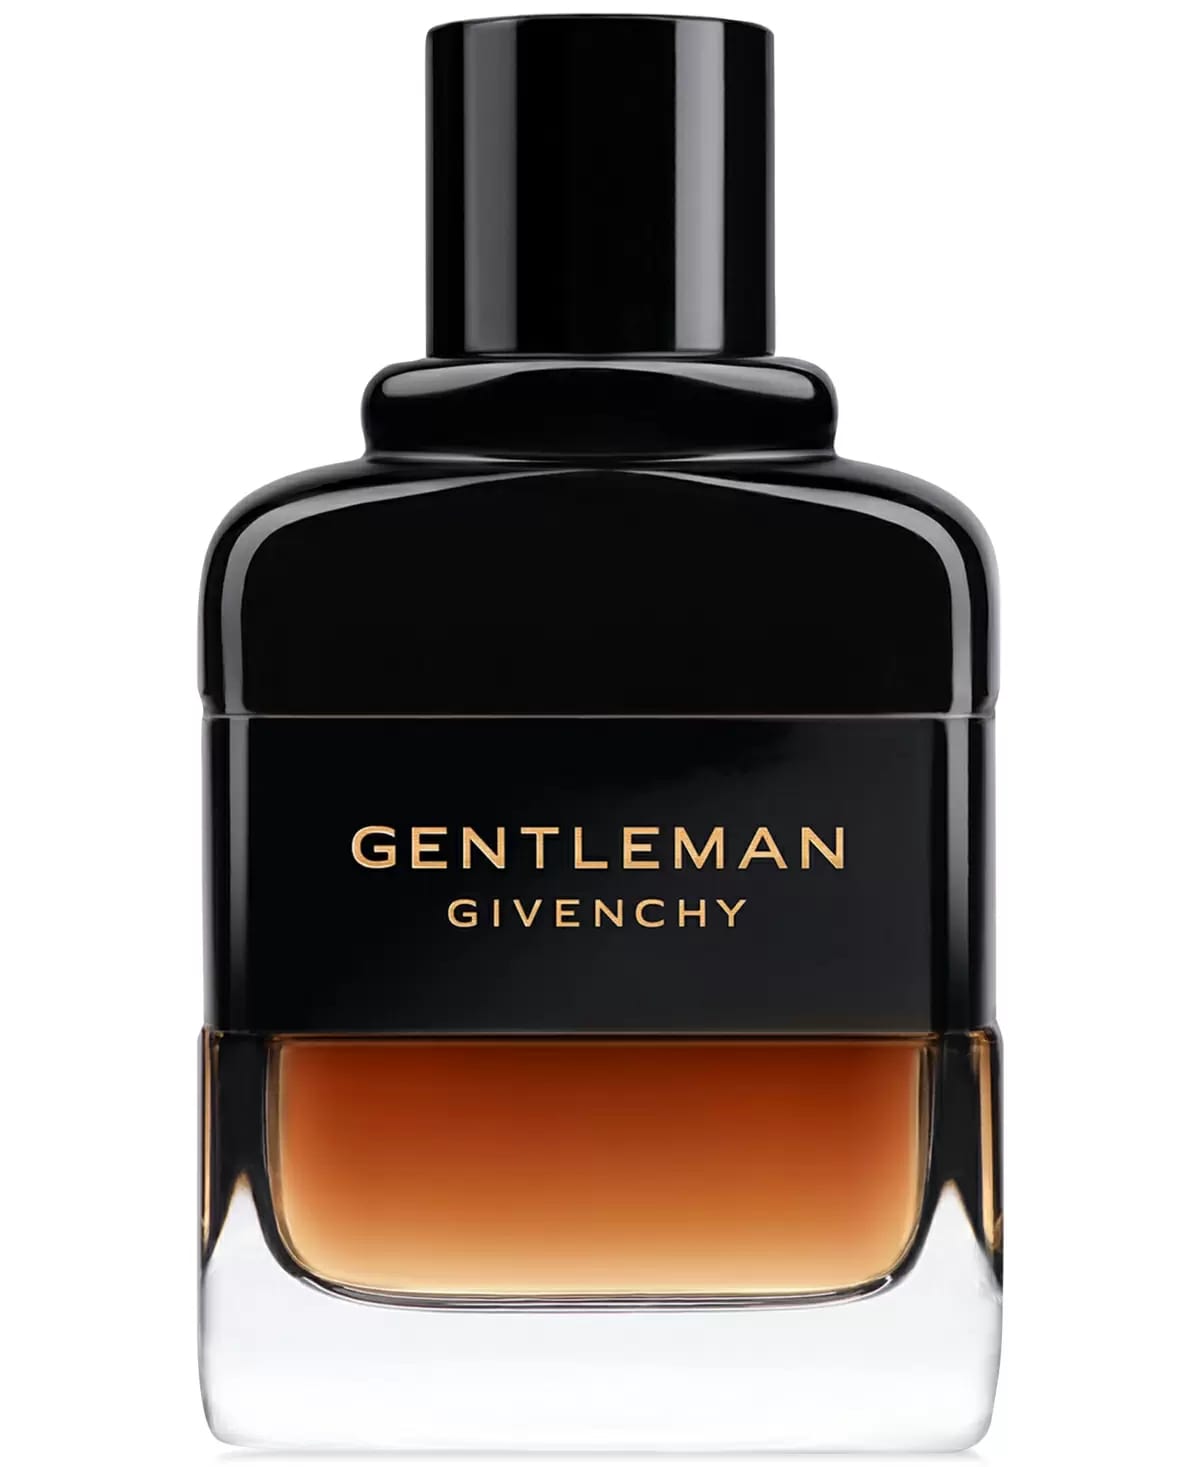 Gentleman Reserve Privee EDP Perfume for Men by Givenchy